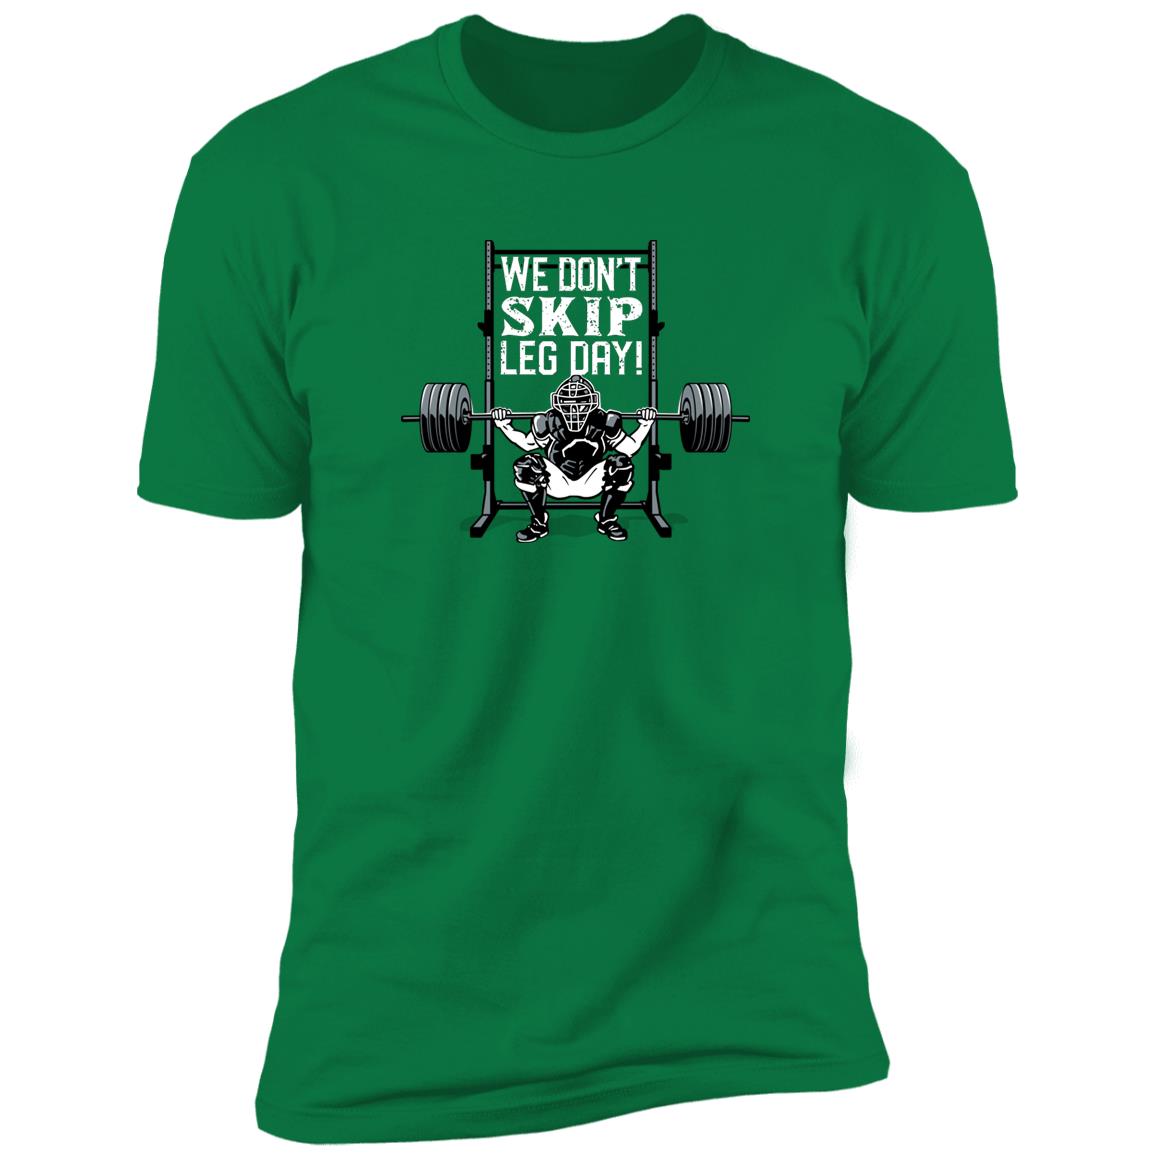 The-Catching-Guy-weights-catcher-light-green-tee